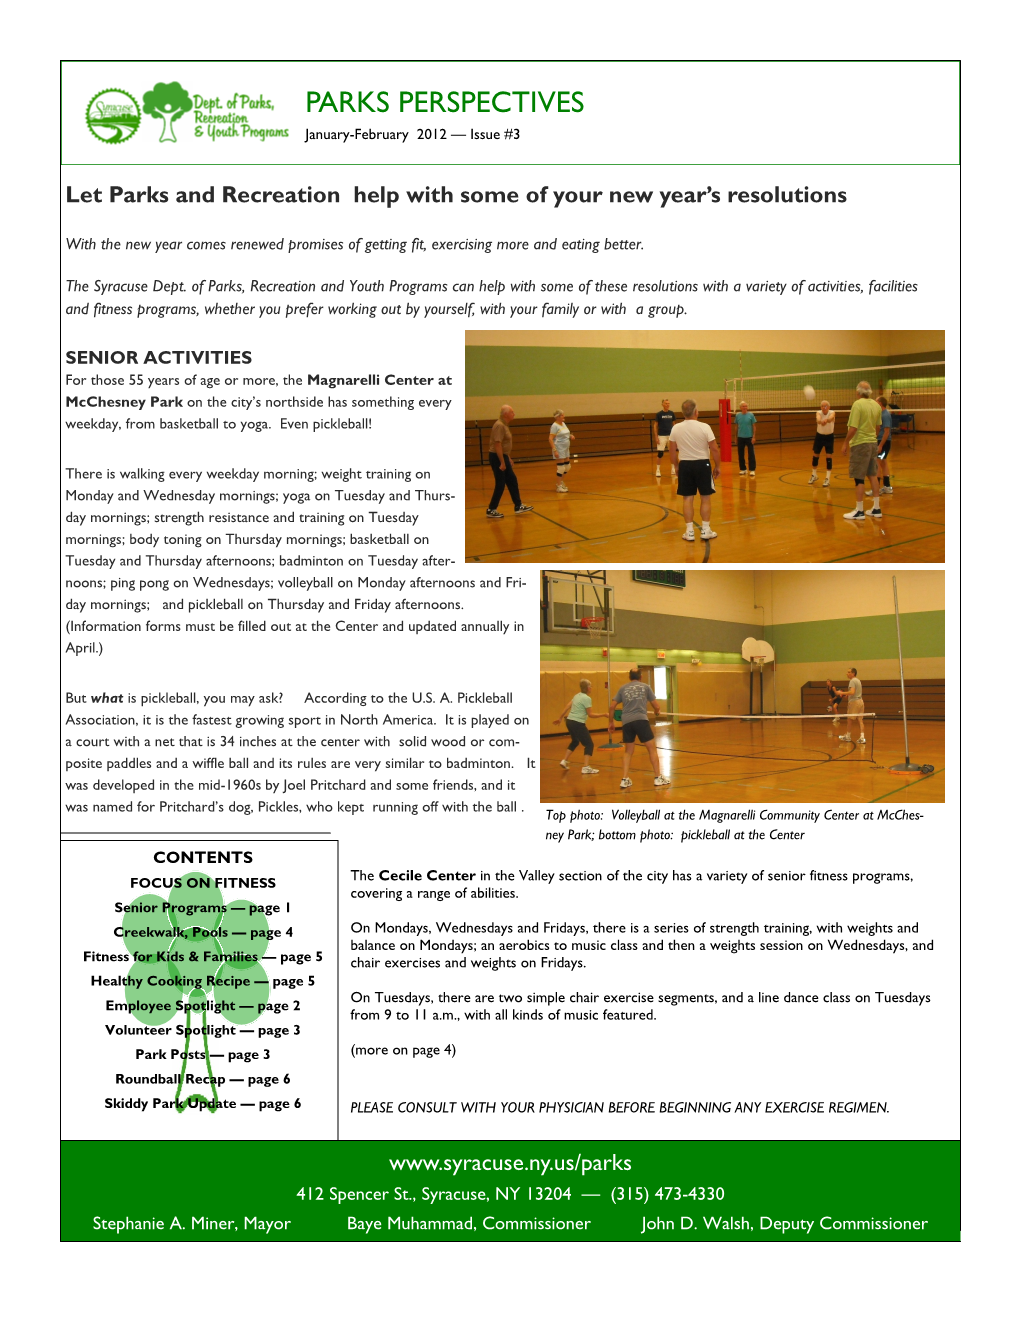 PARKS PERSPECTIVES January-February 2012 — Issue #3